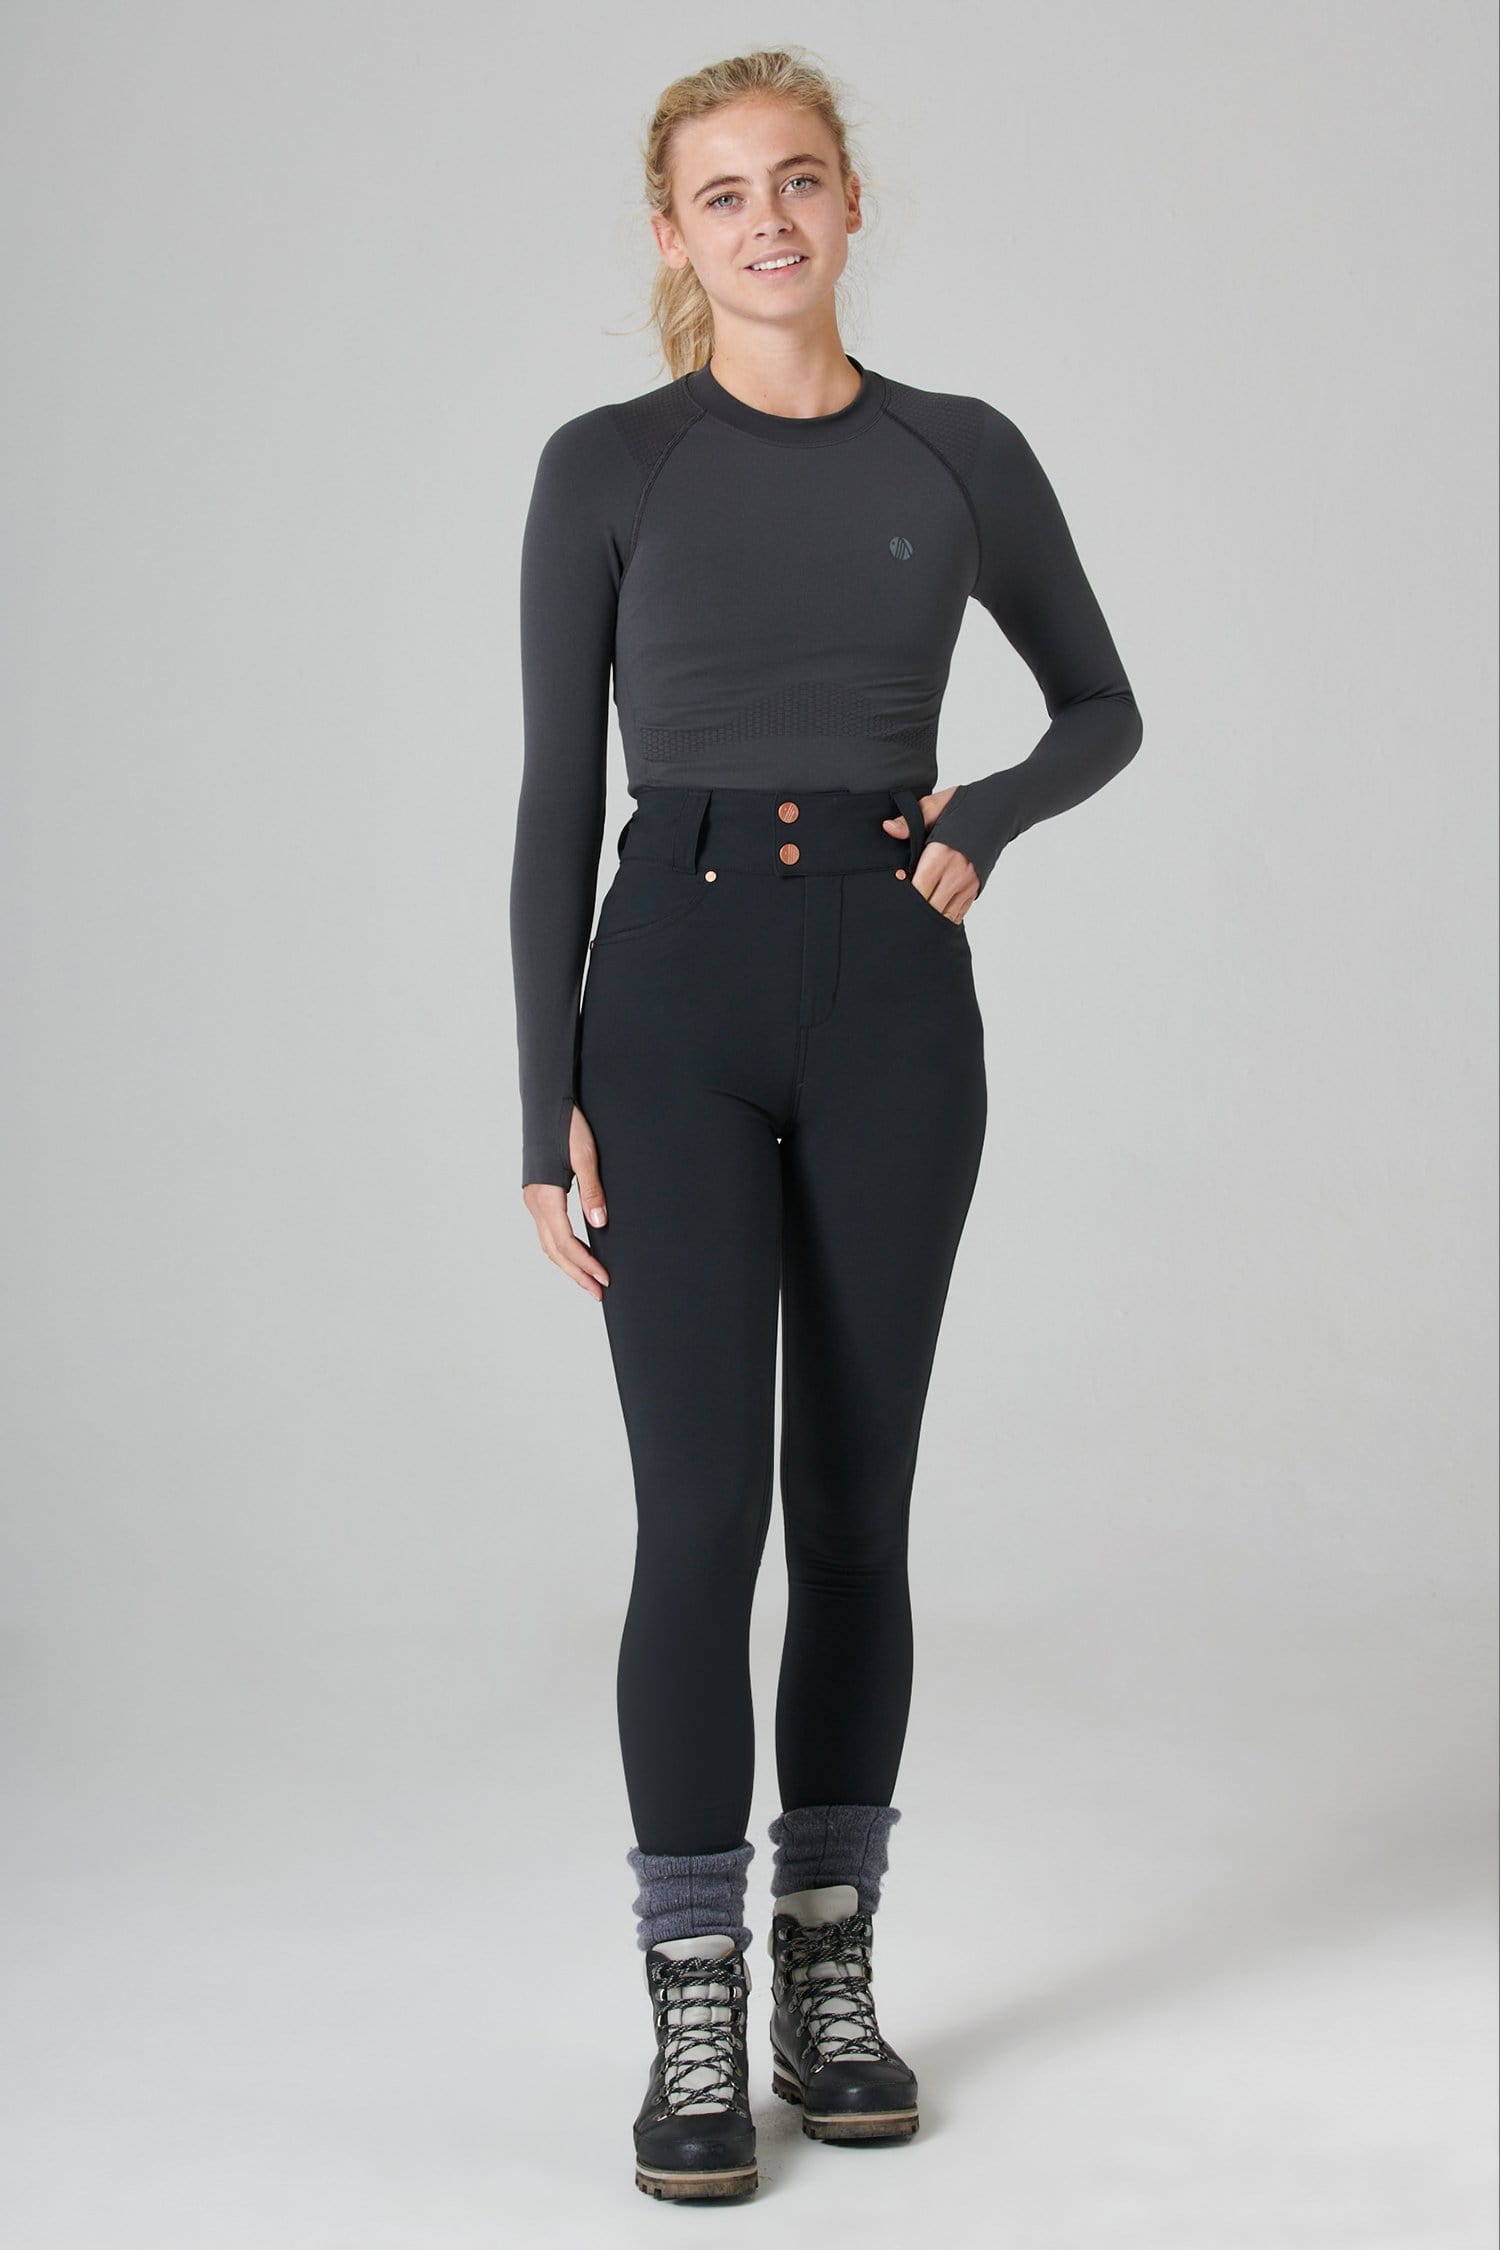 The Shape Skinny Outdoor Trousers - Black Trousers  